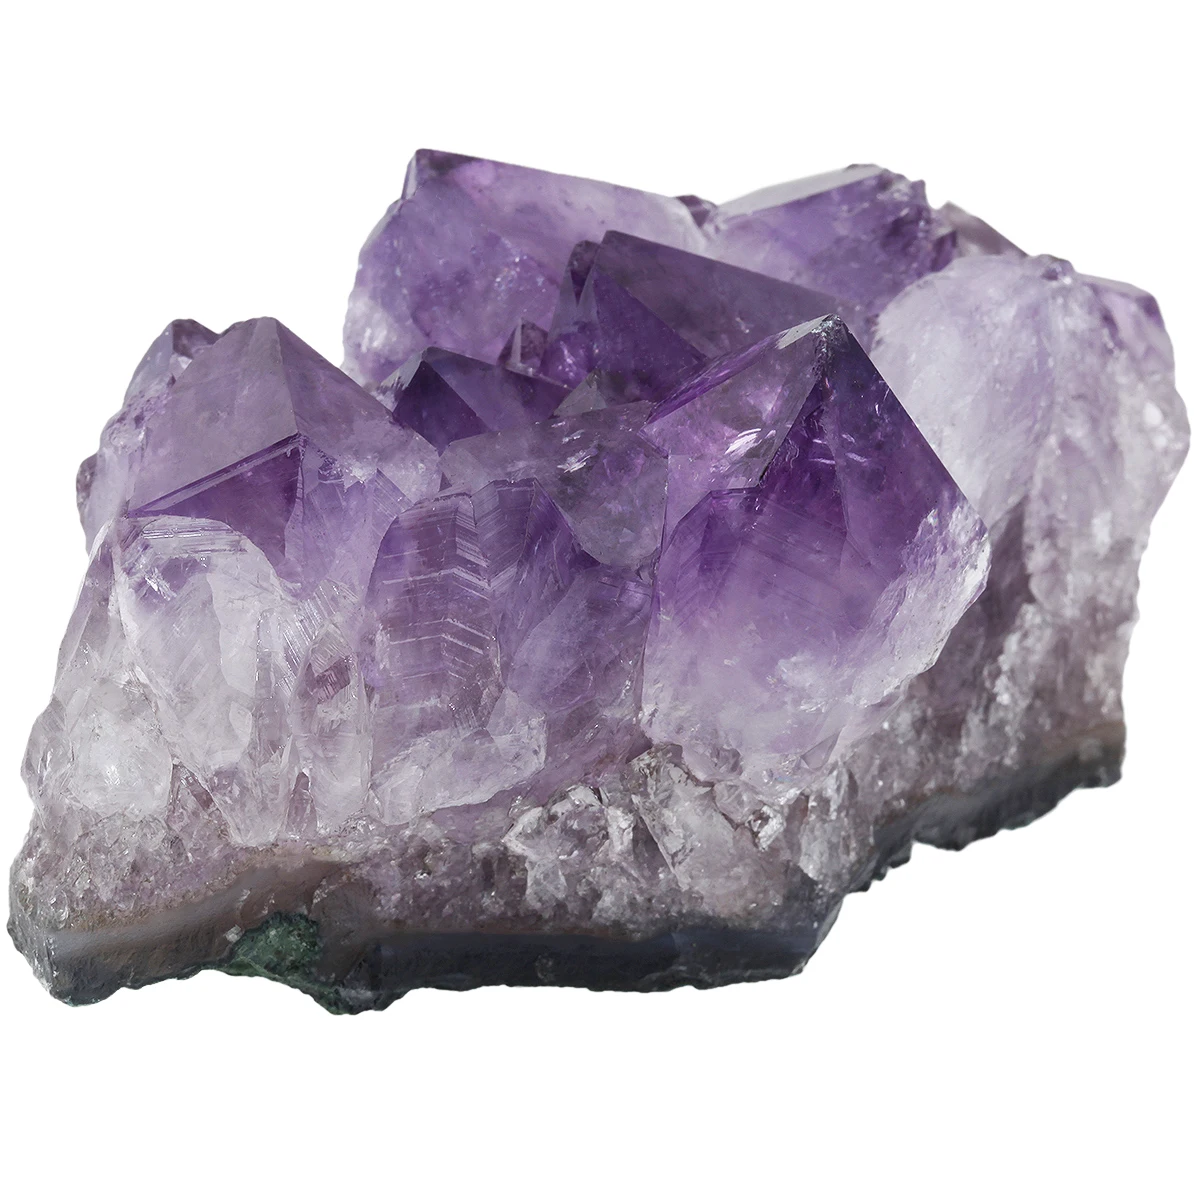 TUMBEELLUWA Natural Raw Amethyst Cluster Irregular Mineral Specimen Healing Crystal Stone Room Decor Home Decoration tumbeelluwa 100g irregular natural rock quartz cluster healing crystal stone crafts for table decoration nordic home ornaments